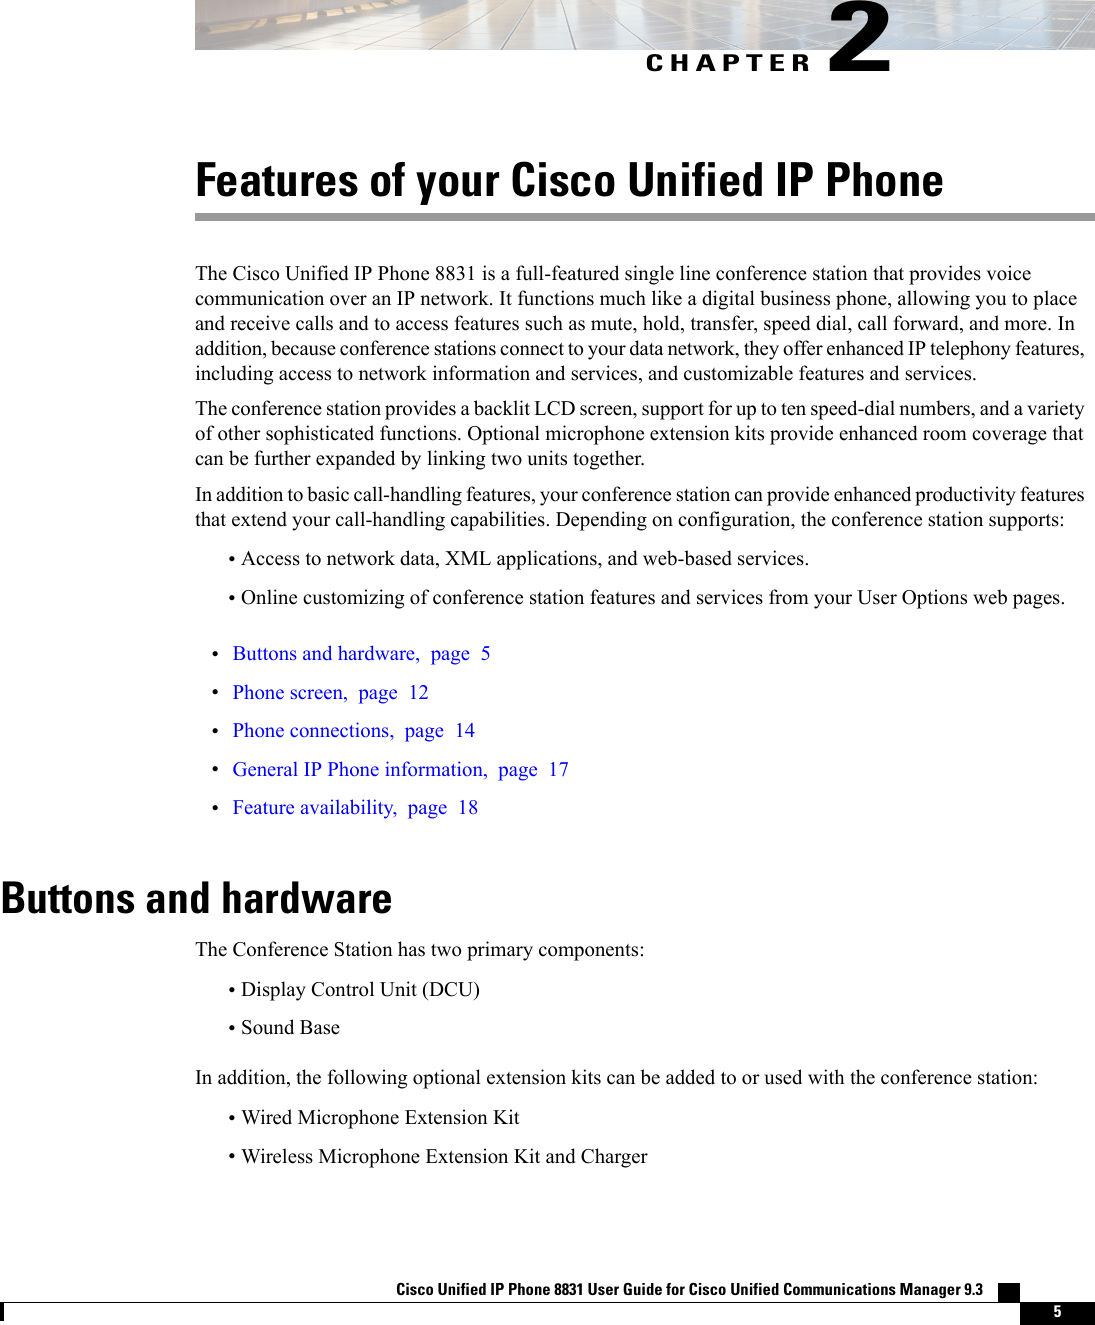 CHAPTER 2Features of your Cisco Unified IP PhoneThe Cisco Unified IP Phone 8831 is a full-featured single line conference station that provides voicecommunication over an IP network. It functions much like a digital business phone, allowing you to placeand receive calls and to access features such as mute, hold, transfer, speed dial, call forward, and more. Inaddition, because conference stations connect to your data network, they offer enhanced IP telephony features,including access to network information and services, and customizable features and services.The conference station provides a backlit LCD screen, support for up to ten speed-dial numbers, and a varietyof other sophisticated functions. Optional microphone extension kits provide enhanced room coverage thatcan be further expanded by linking two units together.In addition to basic call-handling features, your conference station can provide enhanced productivity featuresthat extend your call-handling capabilities. Depending on configuration, the conference station supports:•Access to network data, XML applications, and web-based services.•Online customizing of conference station features and services from your User Options web pages.•Buttons and hardware, page 5•Phone screen, page 12•Phone connections, page 14•General IP Phone information, page 17•Feature availability, page 18Buttons and hardwareThe Conference Station has two primary components:•Display Control Unit (DCU)•Sound BaseIn addition, the following optional extension kits can be added to or used with the conference station:•Wired Microphone Extension Kit•Wireless Microphone Extension Kit and ChargerCisco Unified IP Phone 8831 User Guide for Cisco Unified Communications Manager 9.3    5